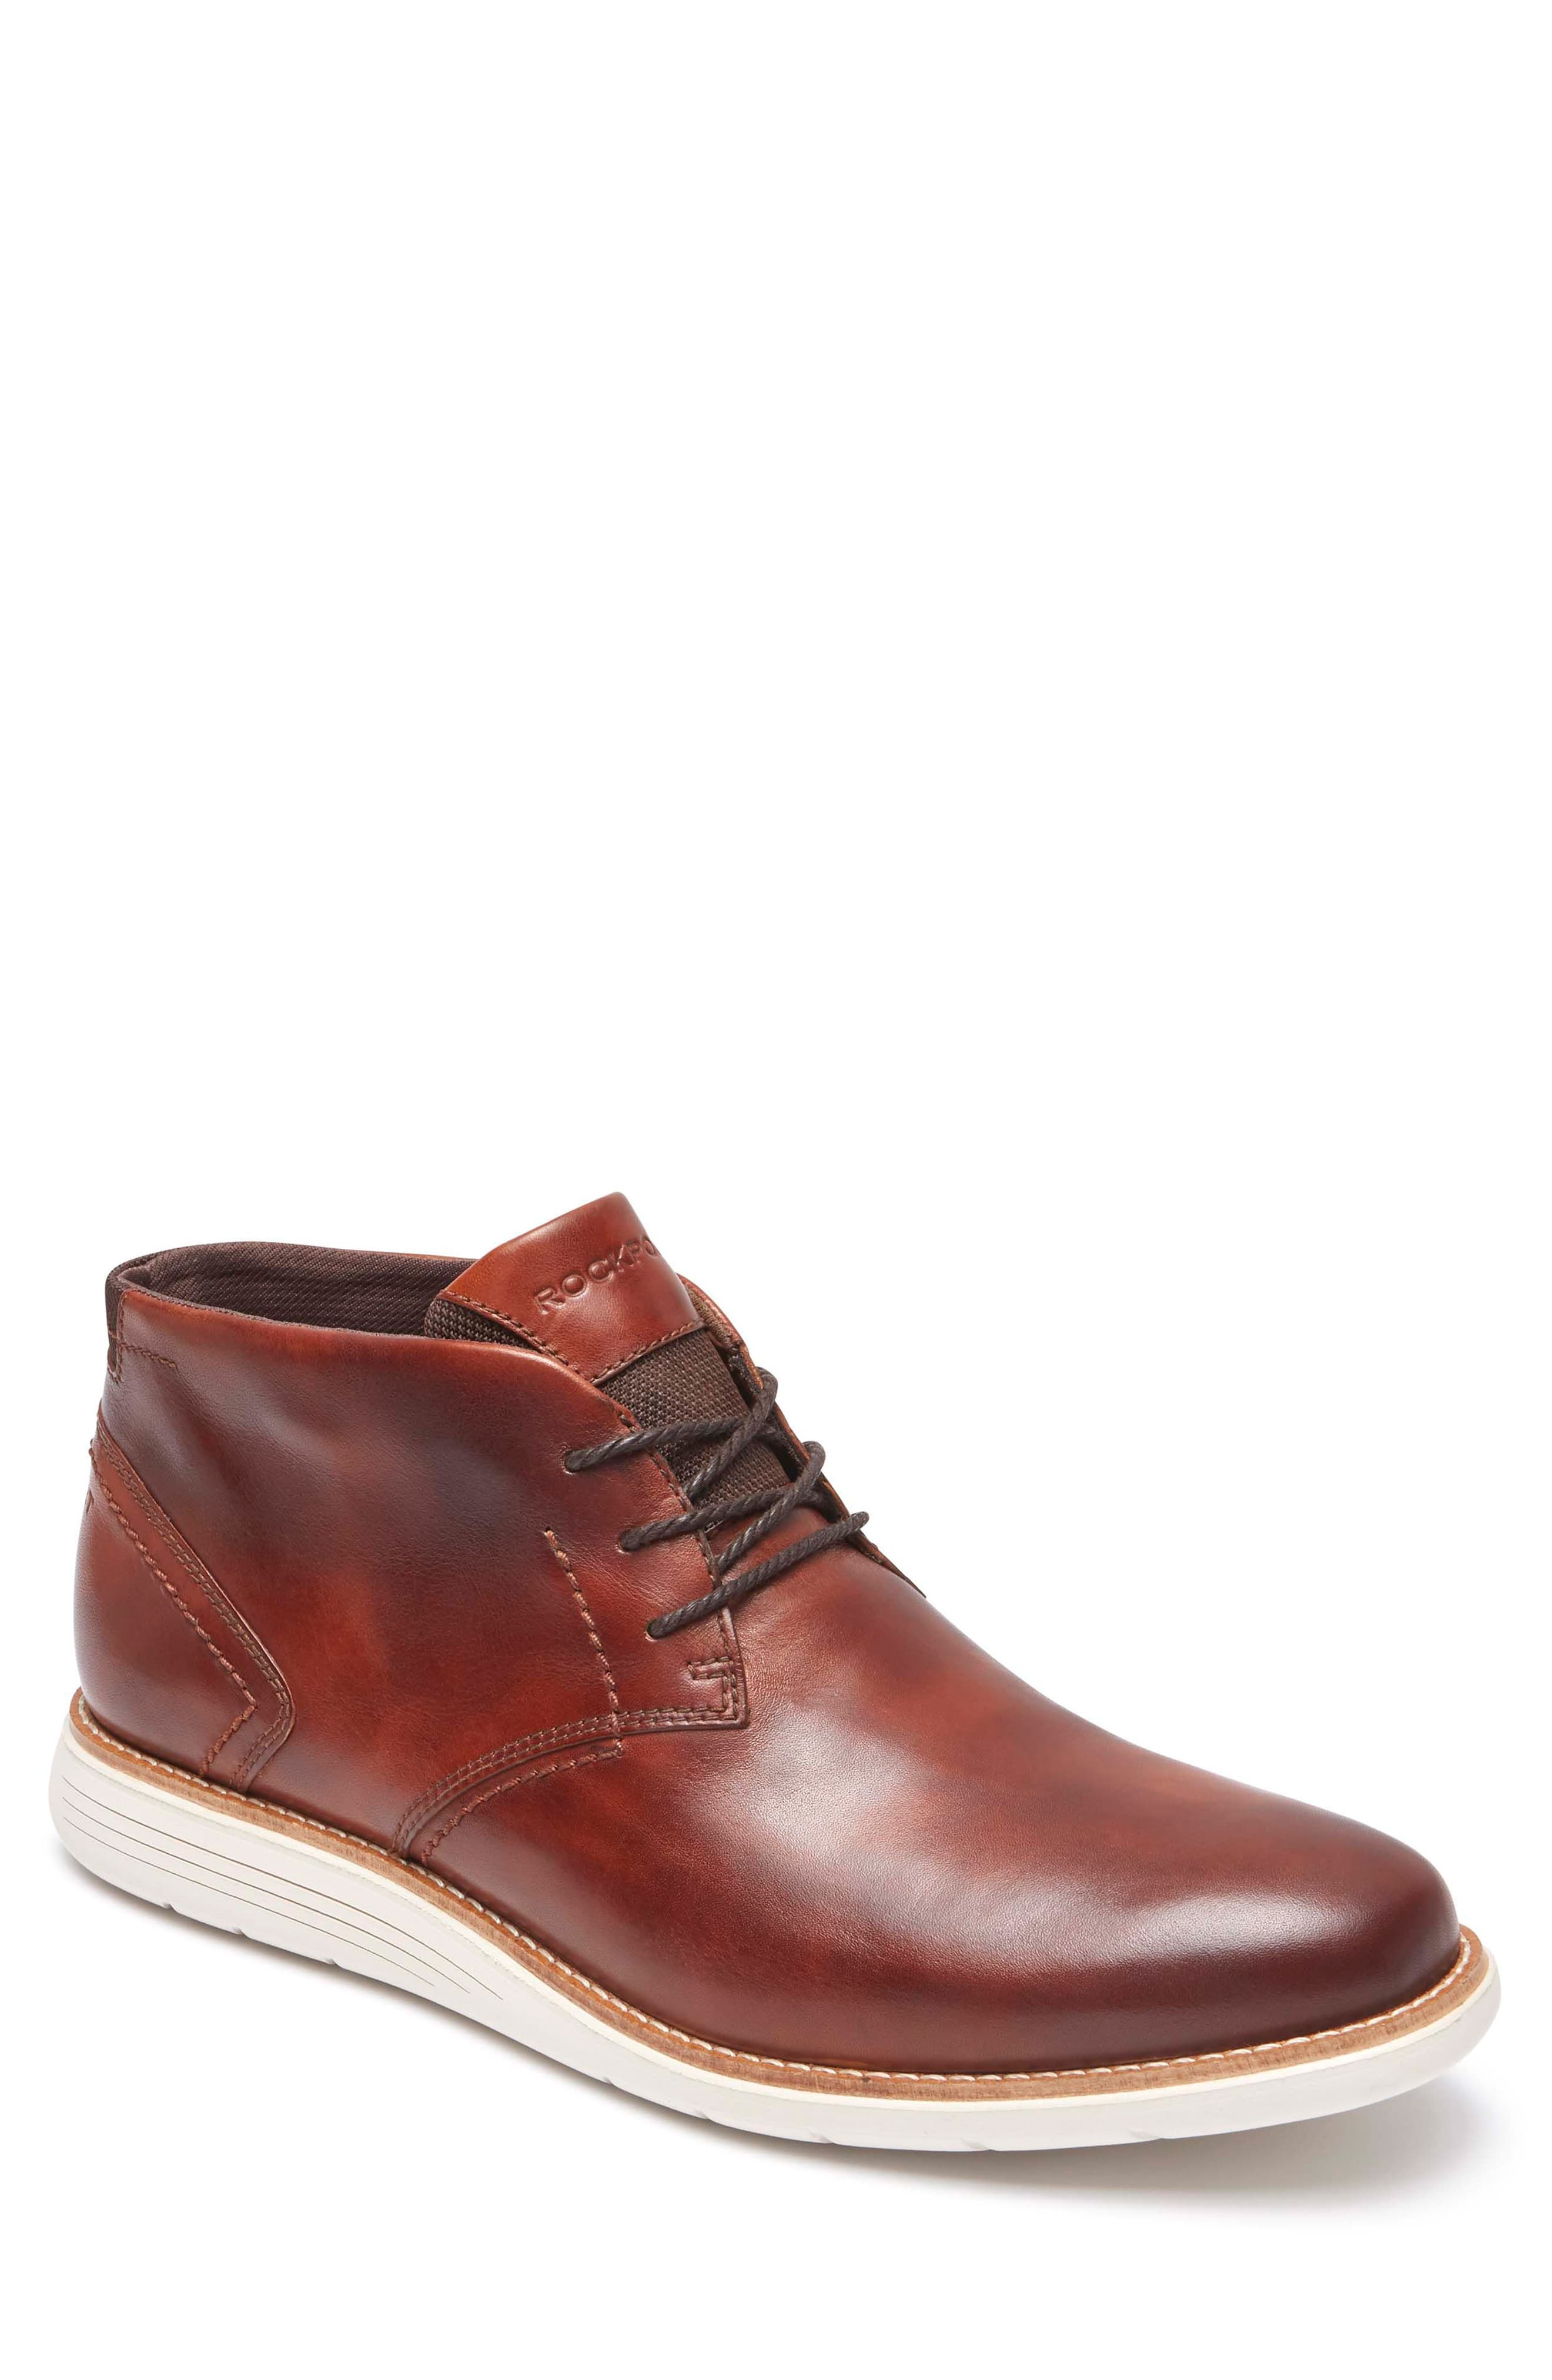 rockport total motion sports chukka boots